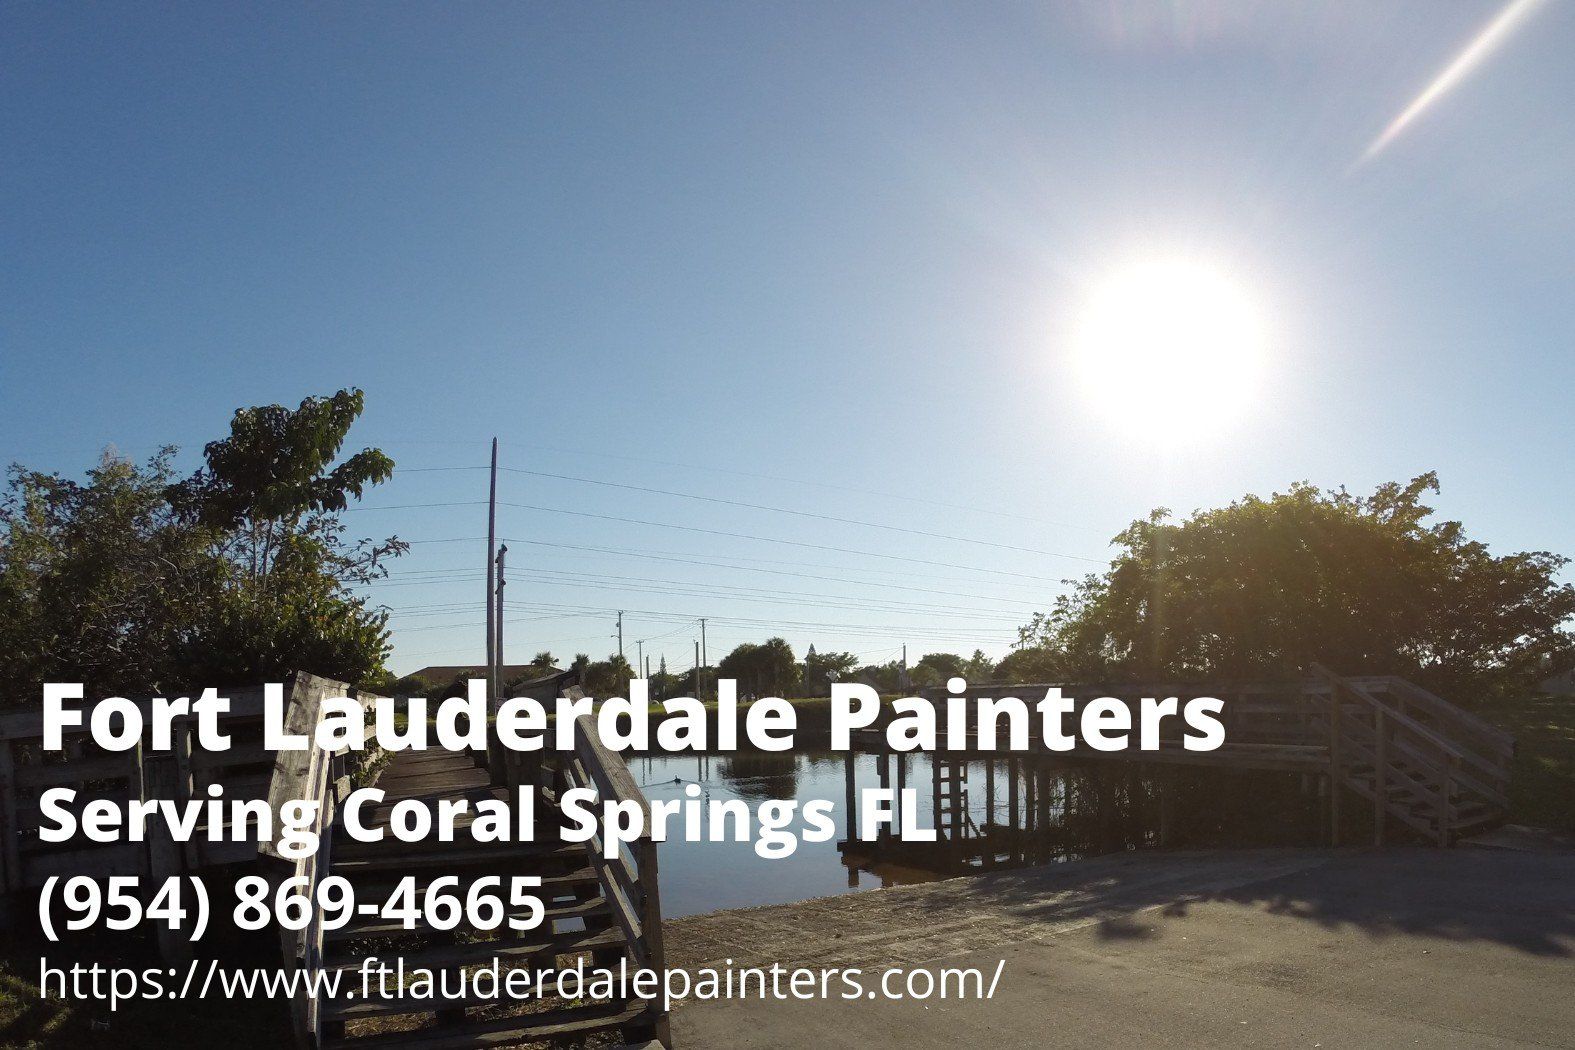 fishing pier in Coral Springs FL. Text by Fort Lauderdale Painters